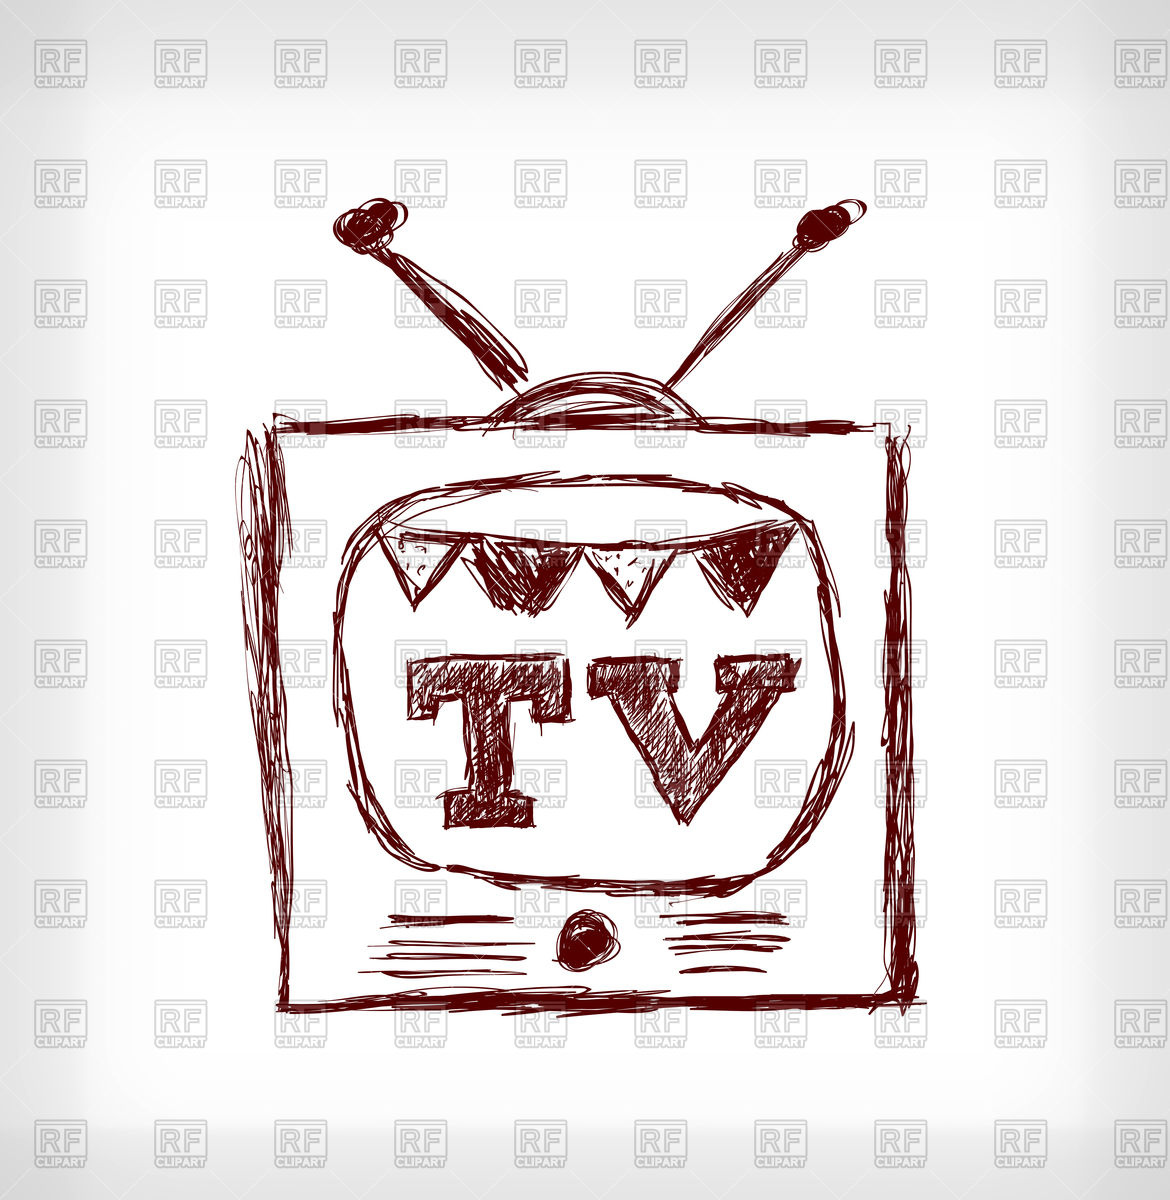 Retro Tv   Hand Drawn Style 75383 Download Royalty Free Vector